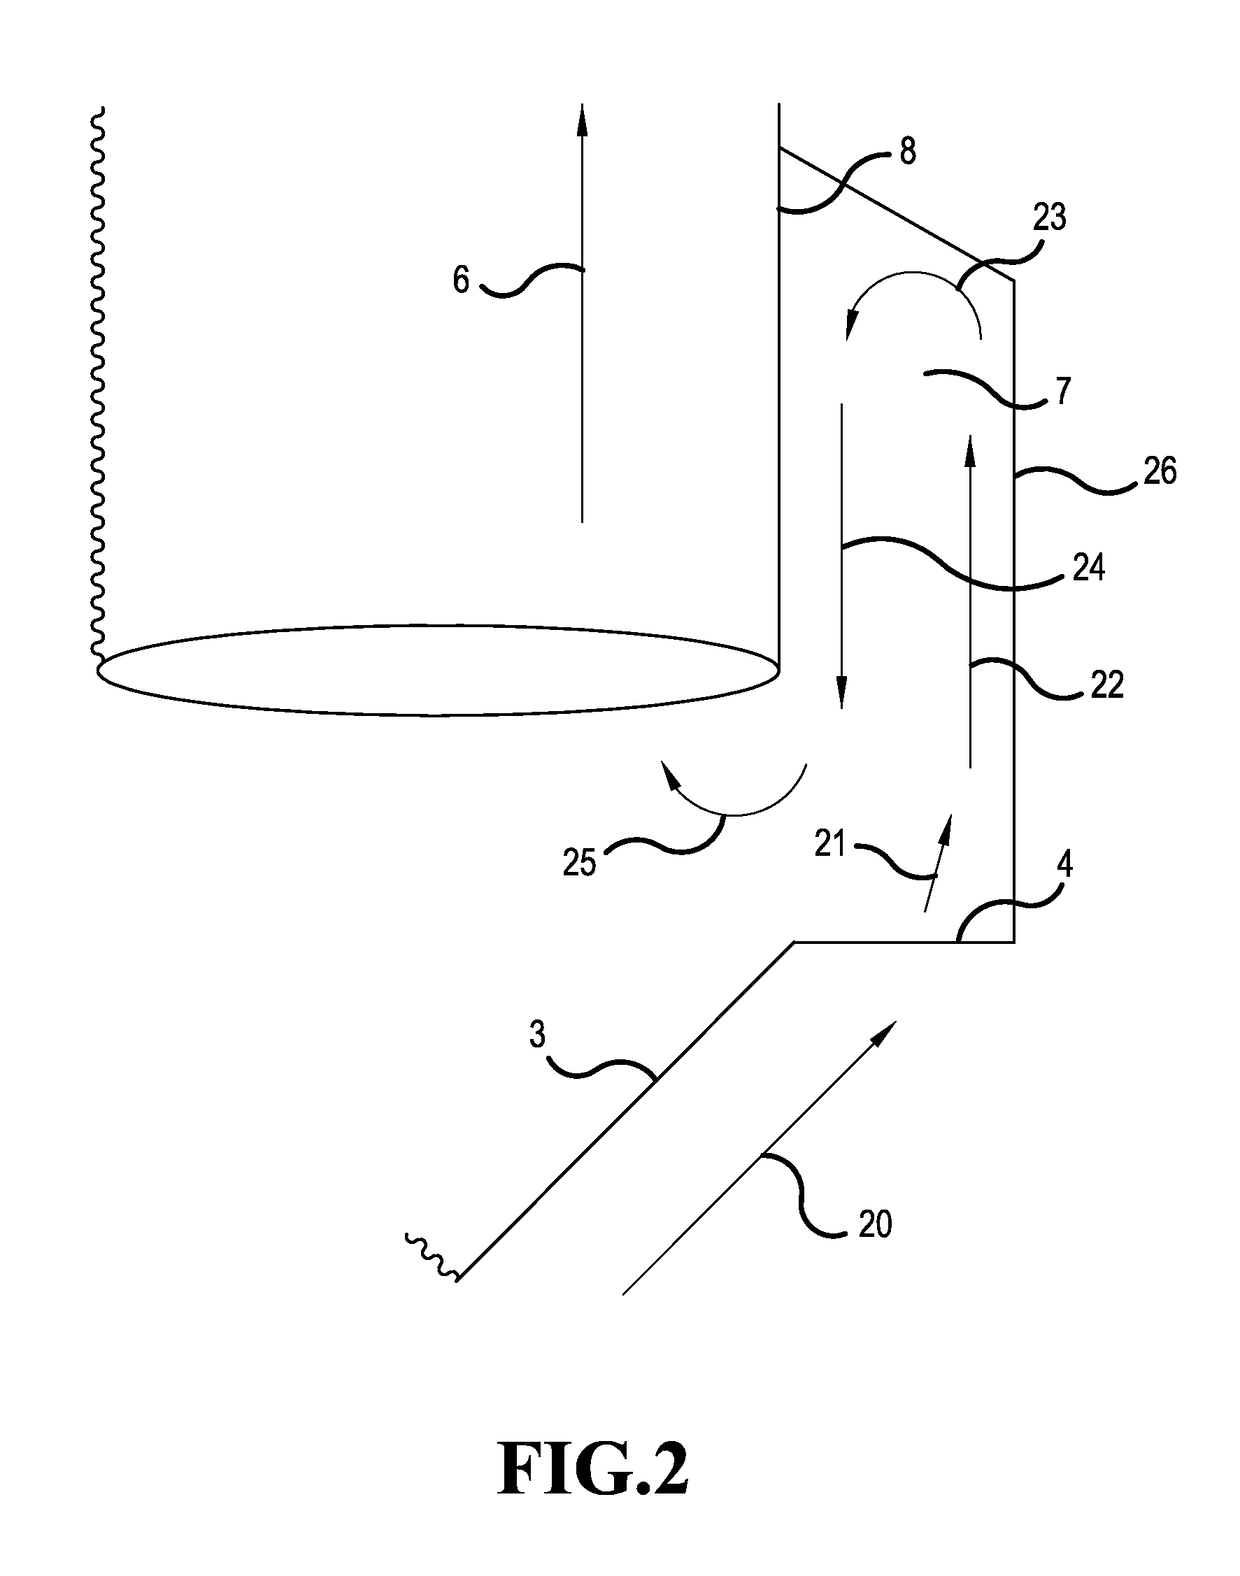 Spark arrestor and methods associated therewith